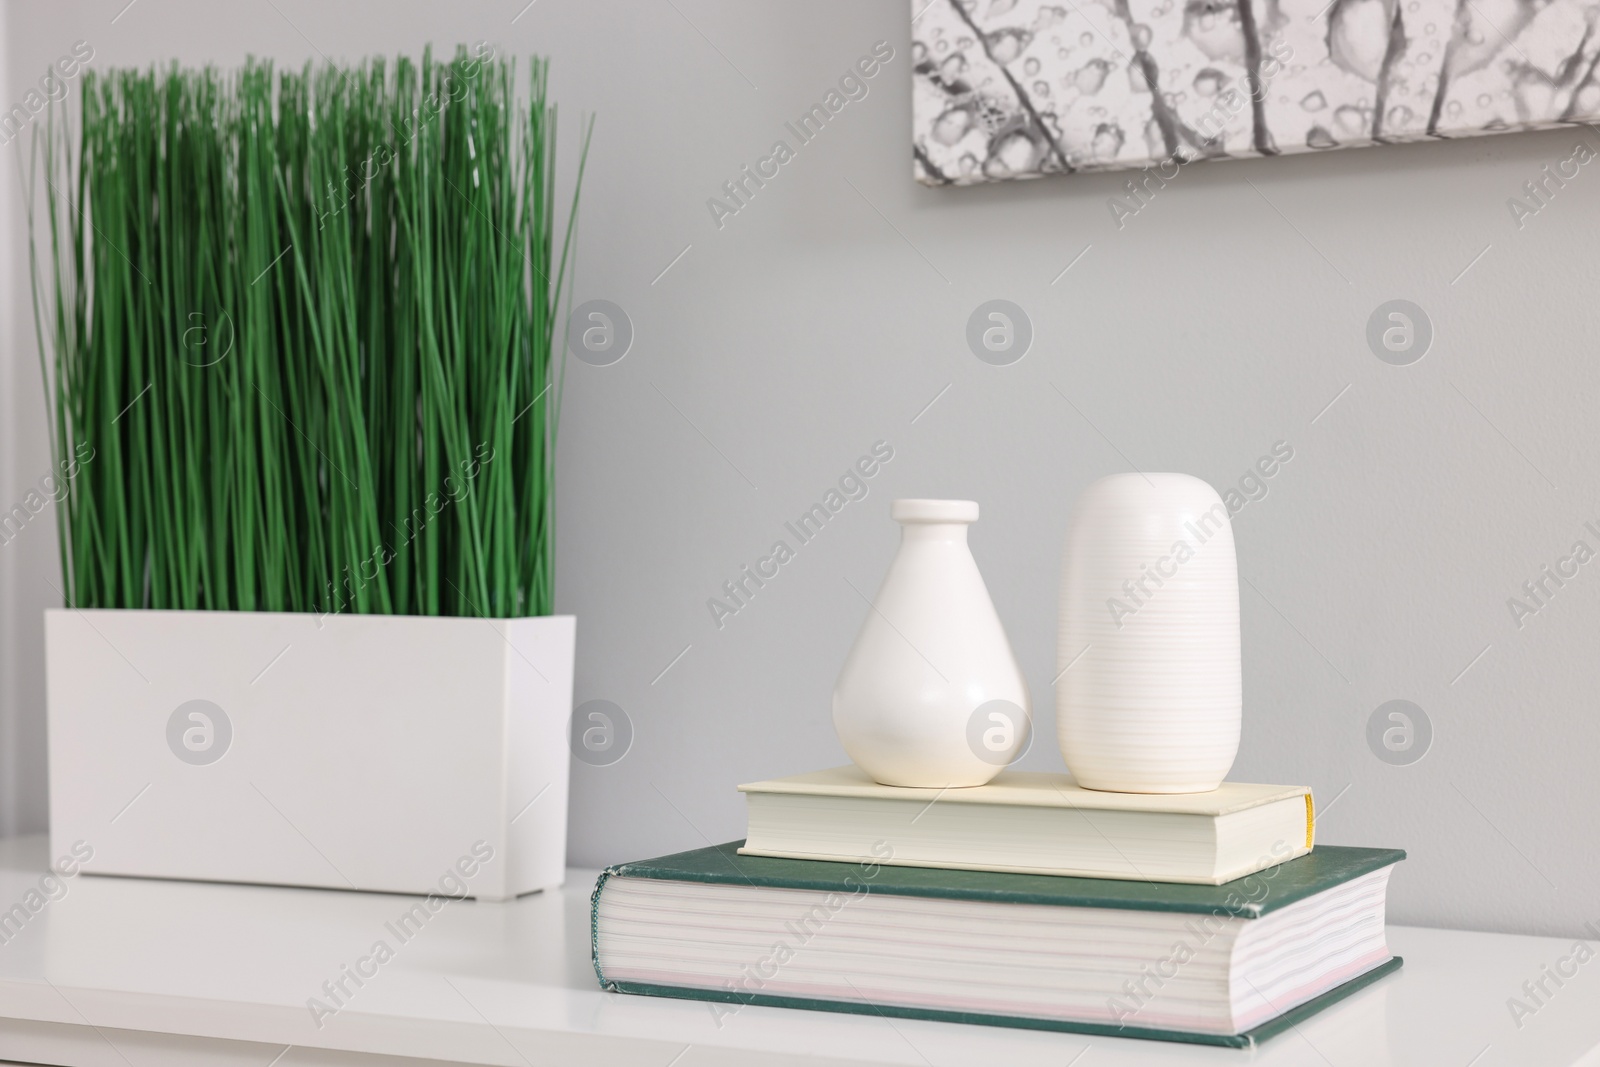 Photo of Potted artificial plant, books and decor on white table indoors